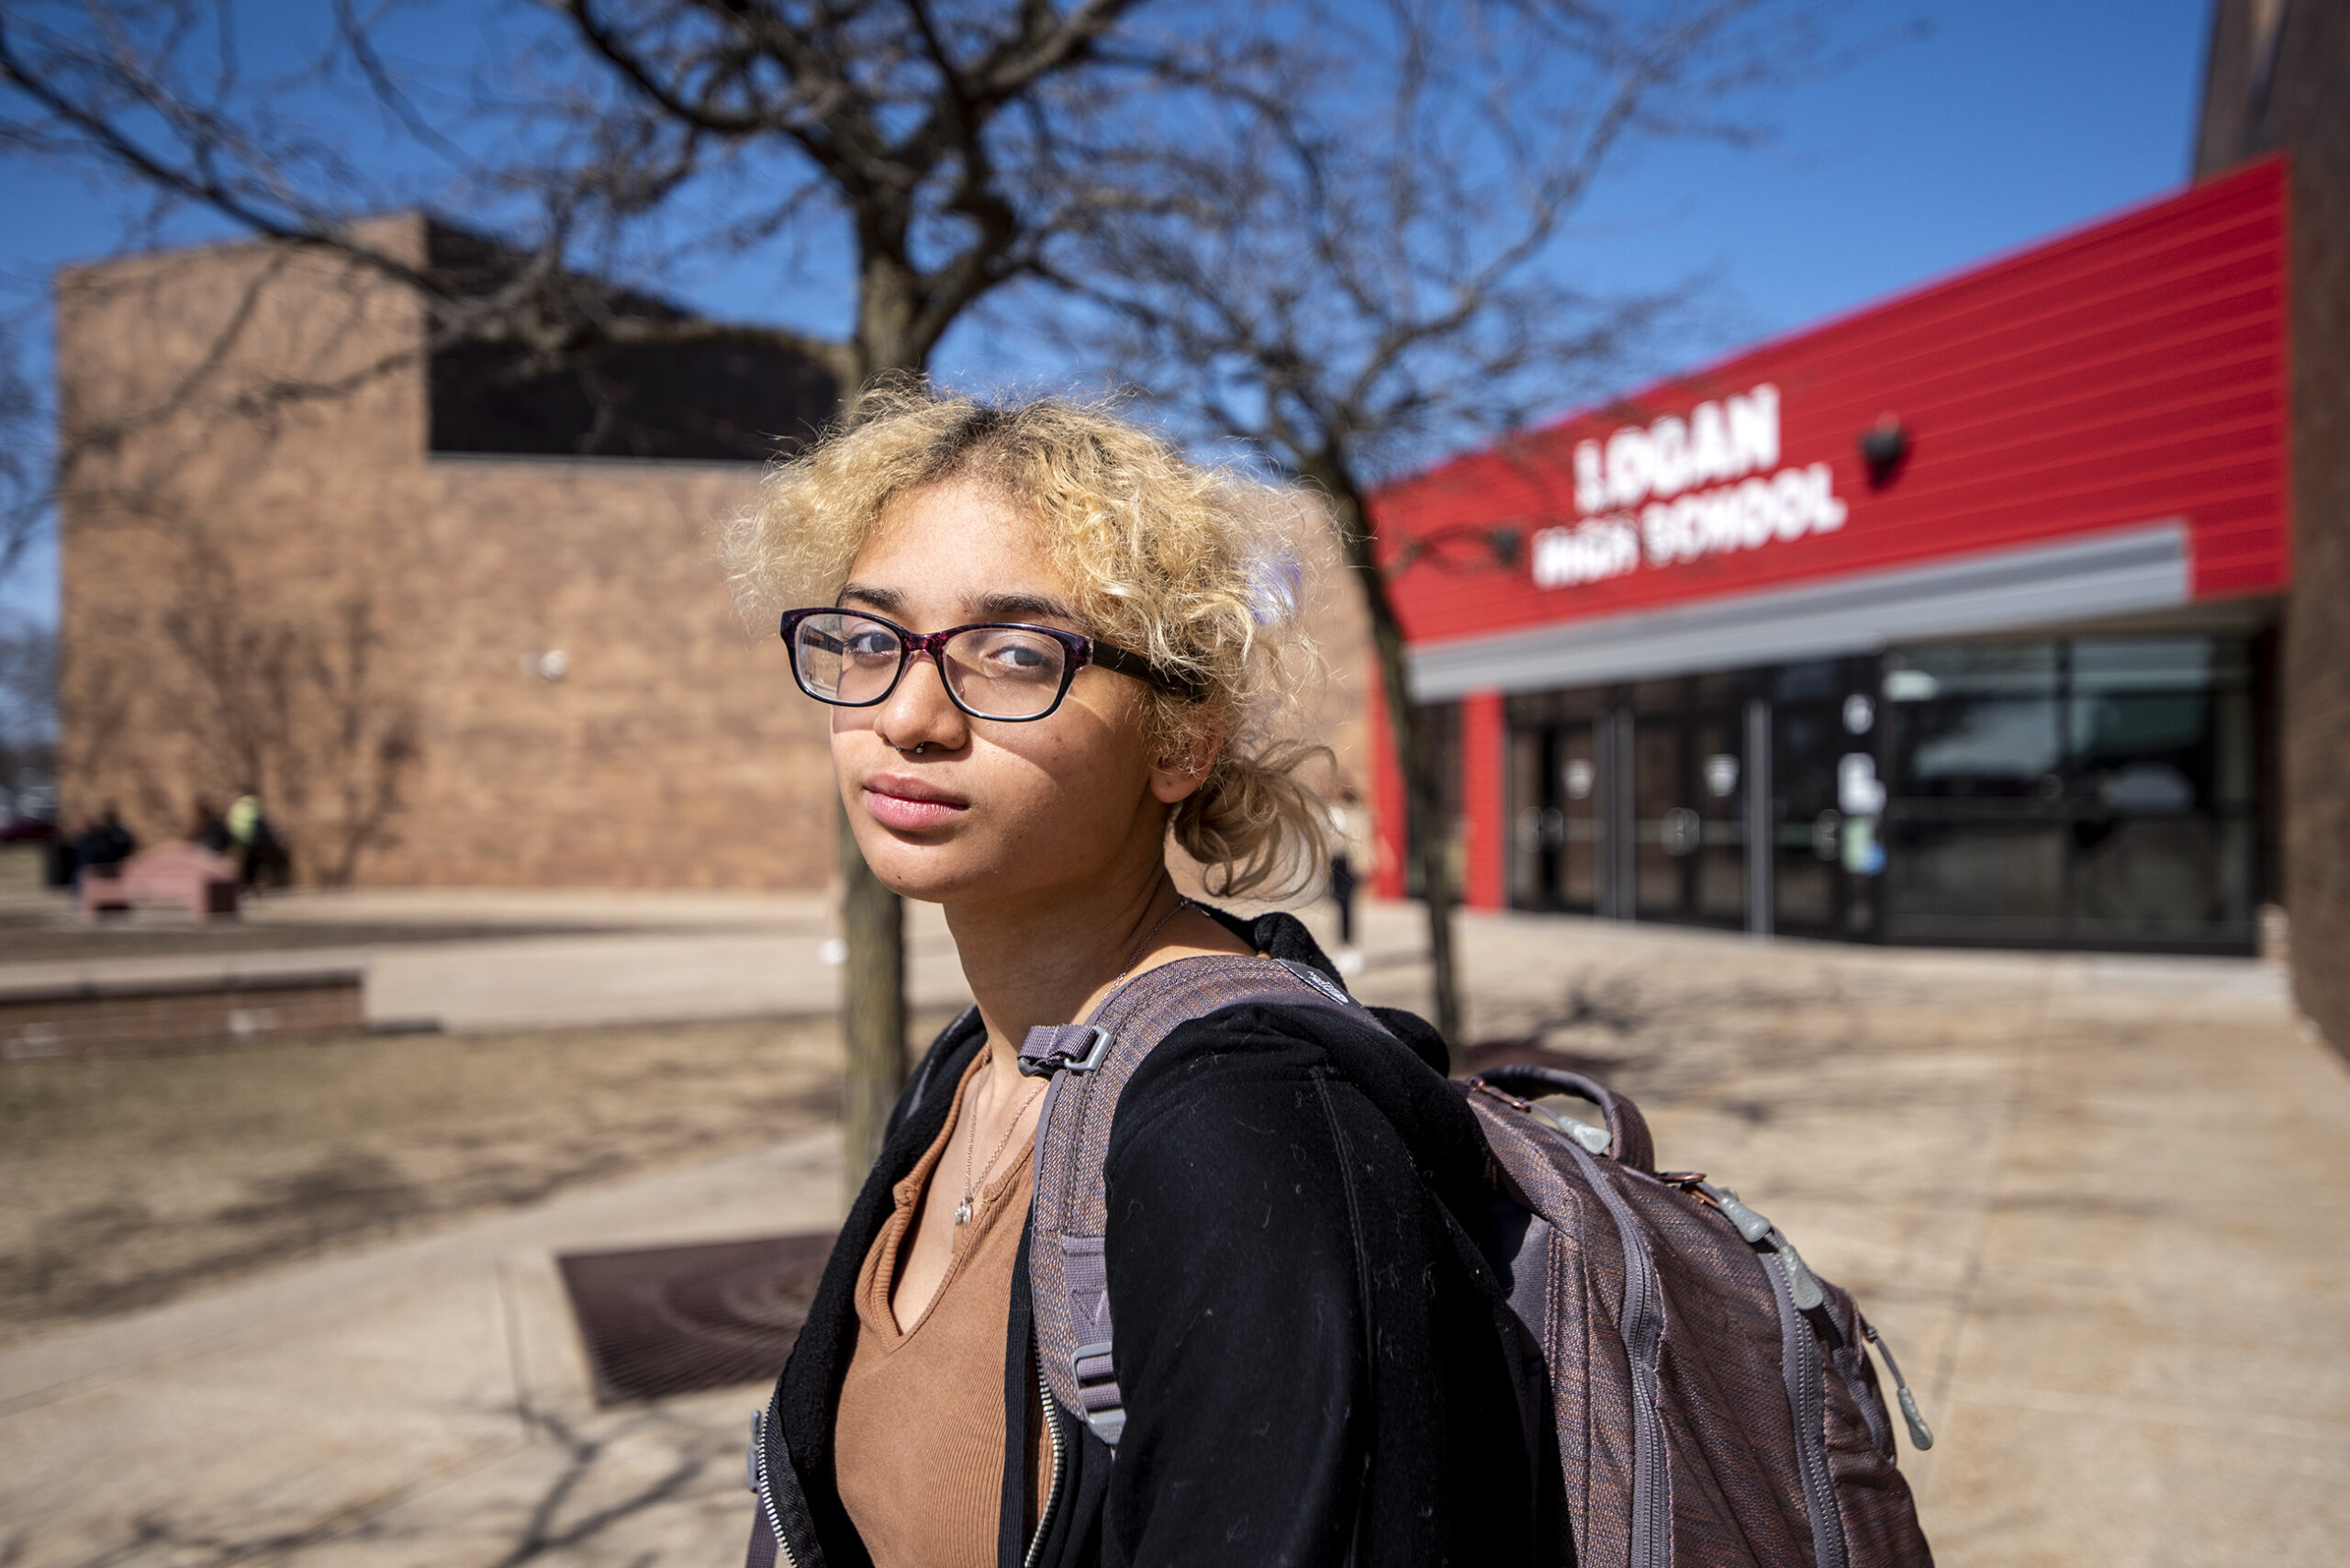 A student wears her backpack as she stands outside of her school on a sunny day.